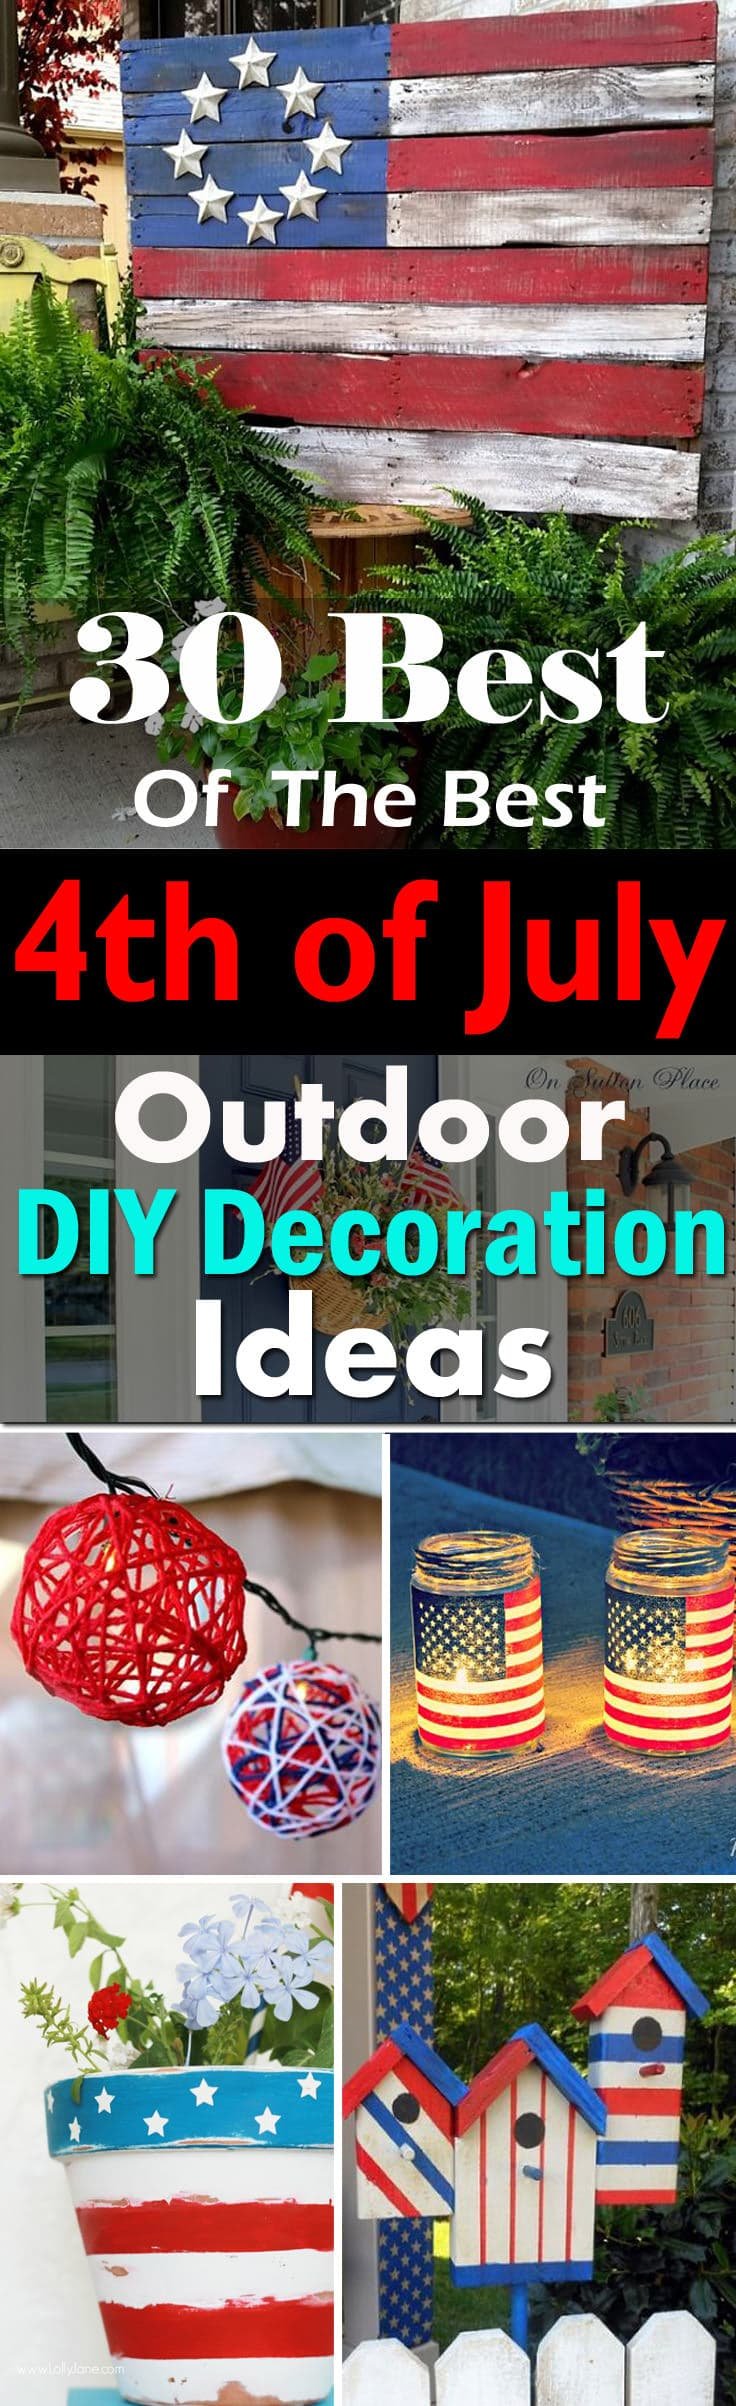 Add the combination of Red, White, and Blue perfectly to your 4th of July Decorations with these DIY ideas!